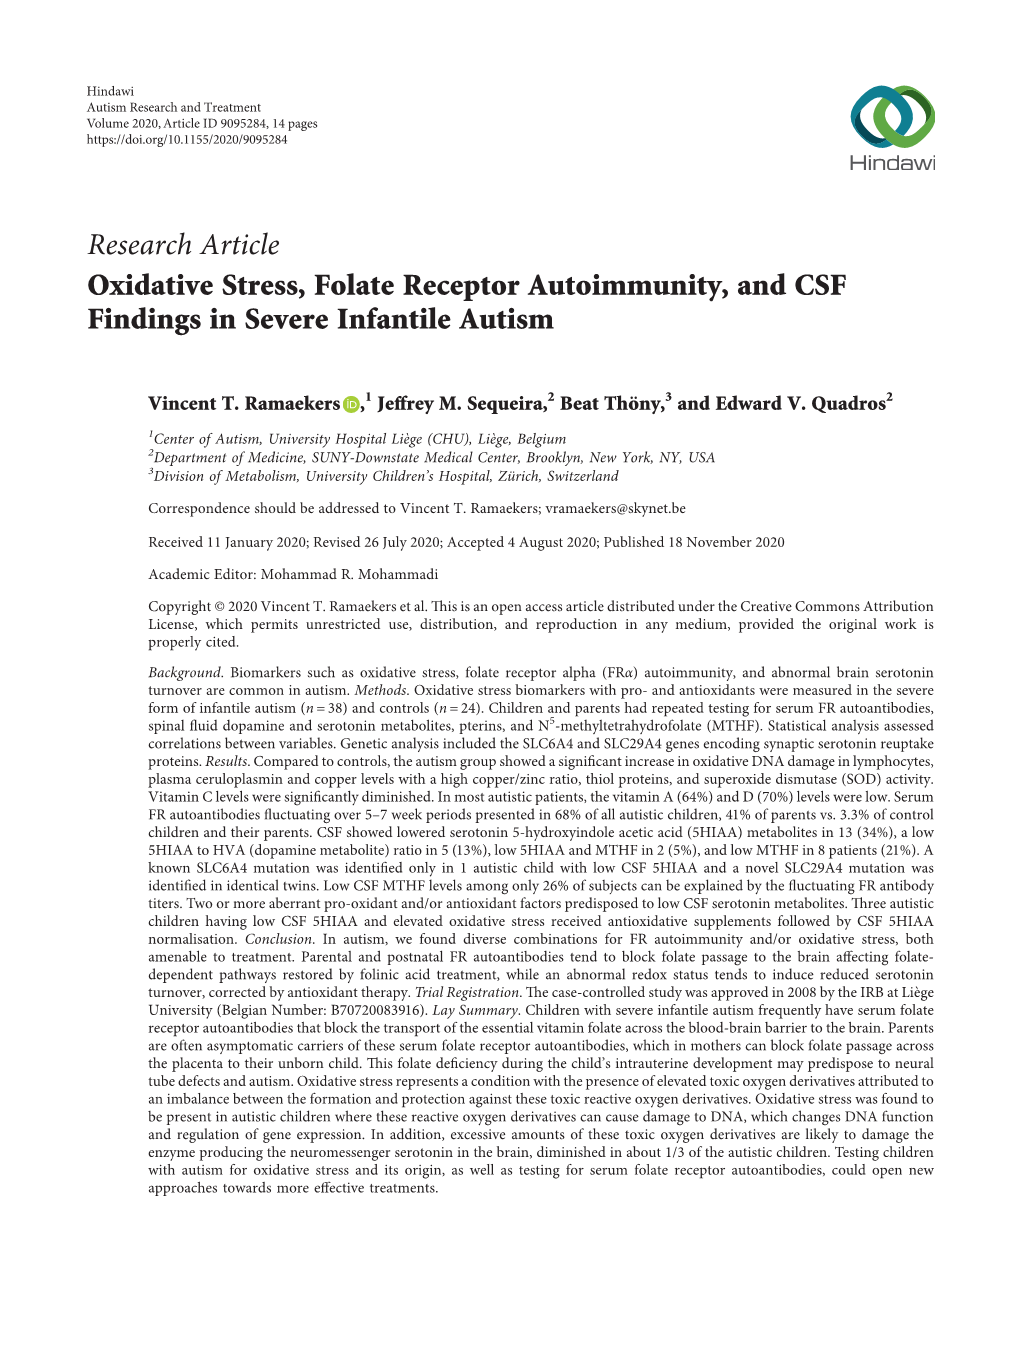 'Oxidative Stress, Folate Receptor Autoimmunity, and CSF Findings In